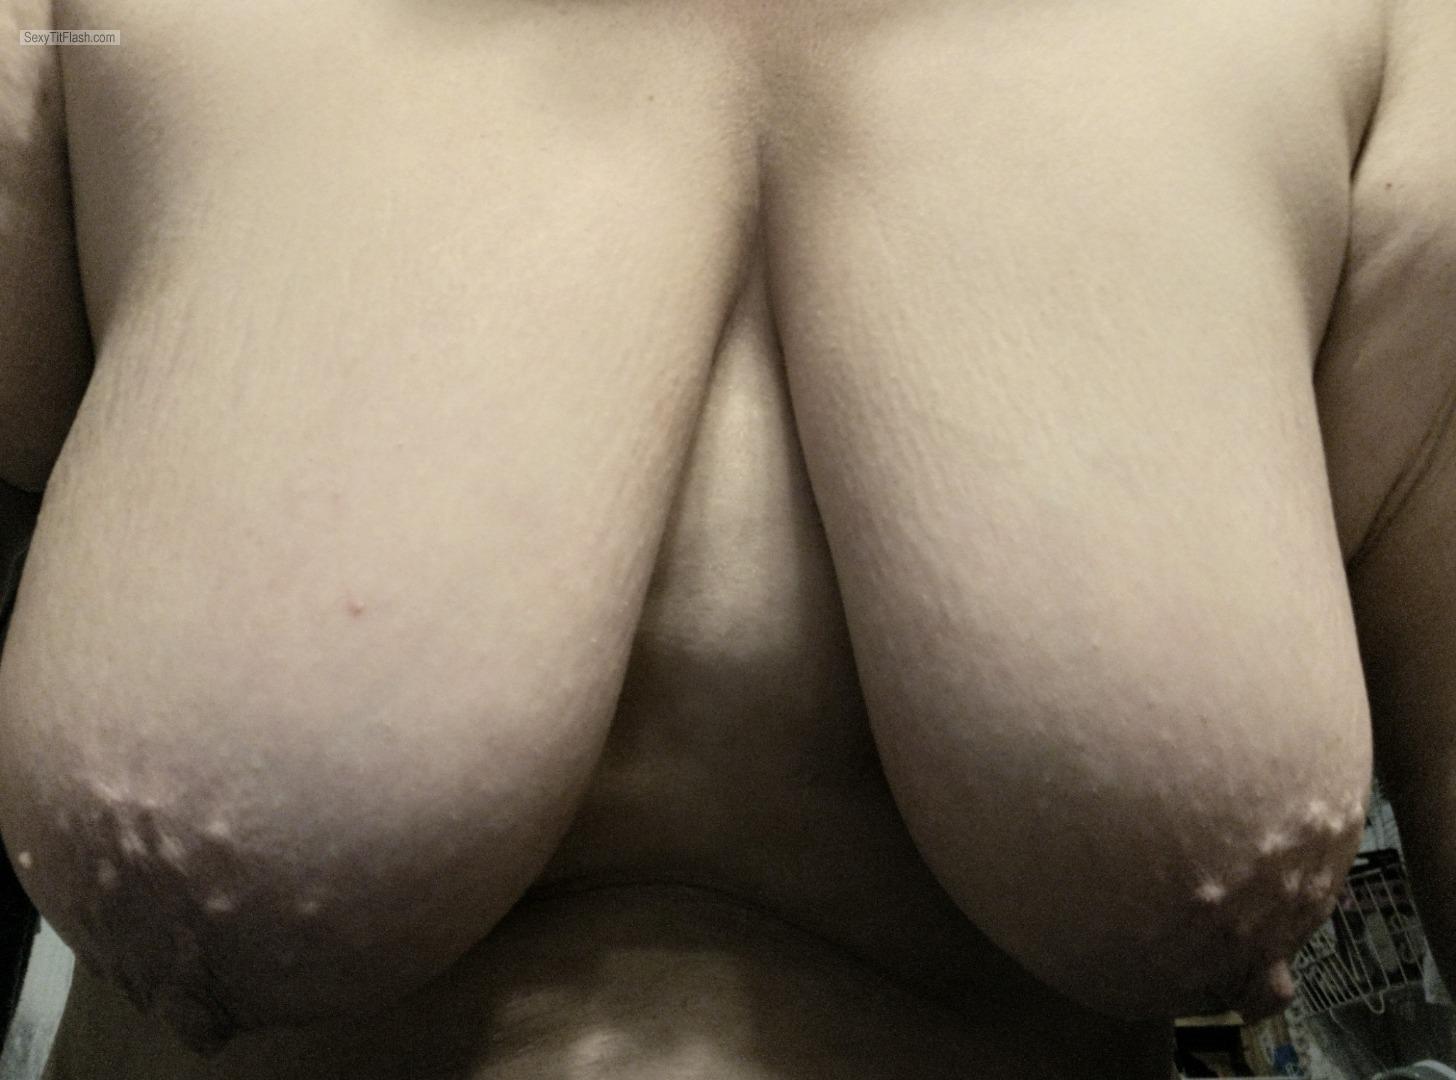 Big Tits Of My Wife Selfie by Peaches